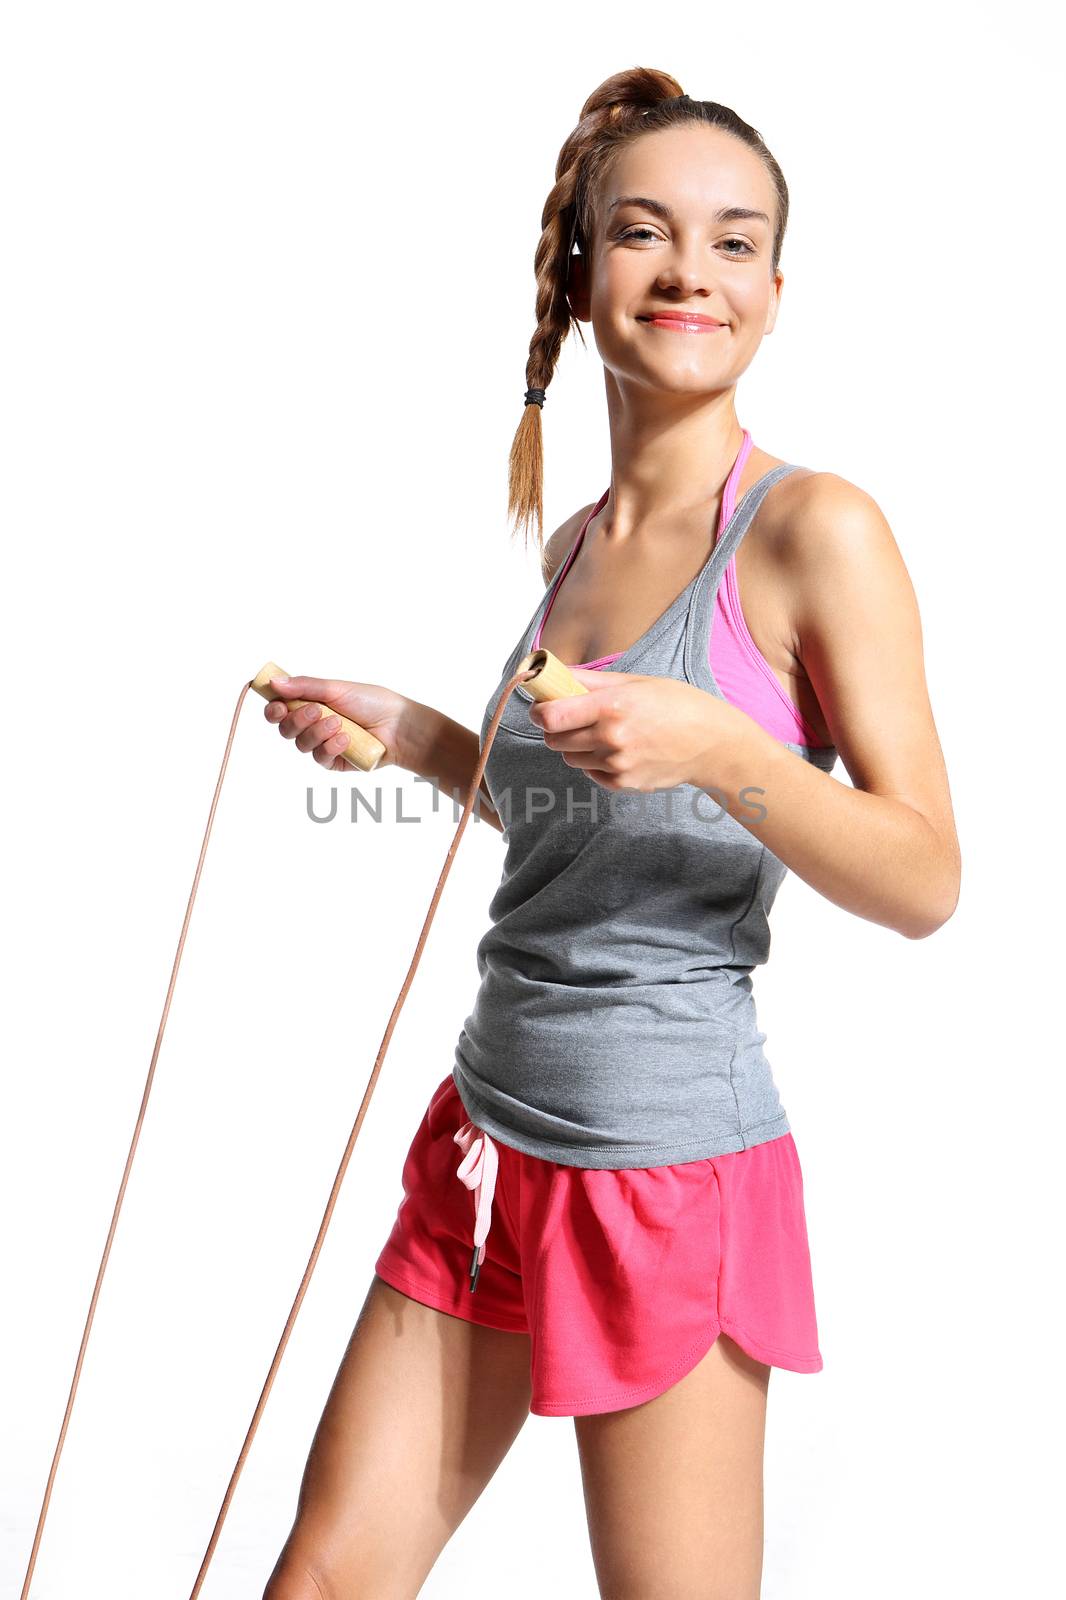 energetic woman jumping rope by robert_przybysz